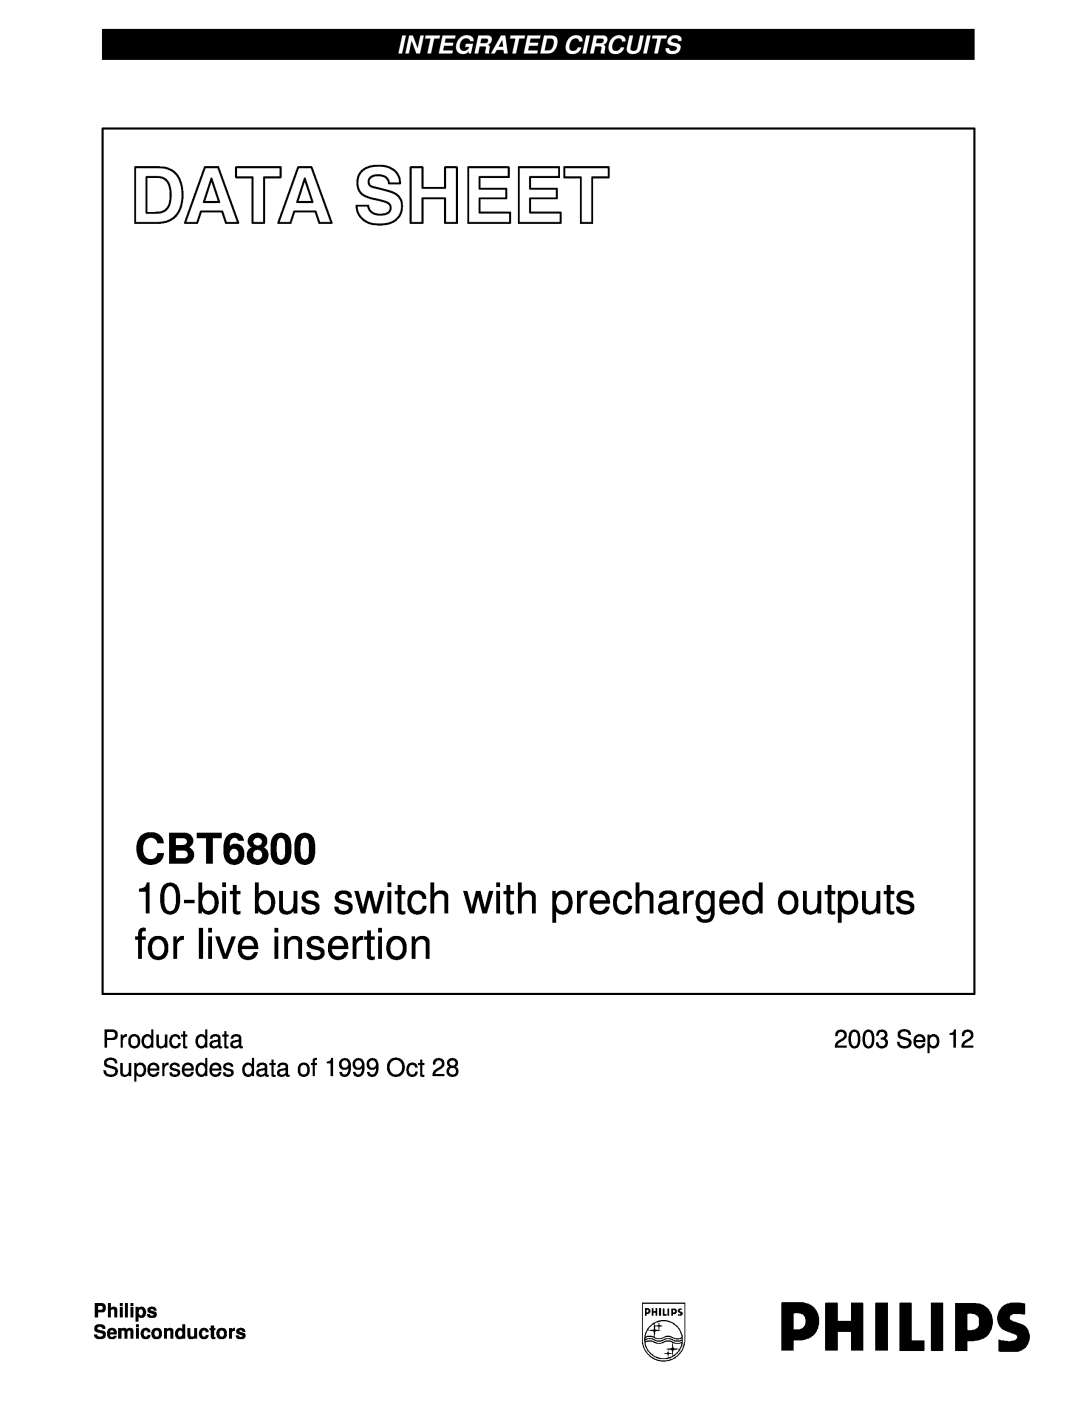 Philips CBT6800 manual Product data, Supersedes data of 1999 Oct, Philips Semiconductors, Integrated Circuits, 2003 Sep 